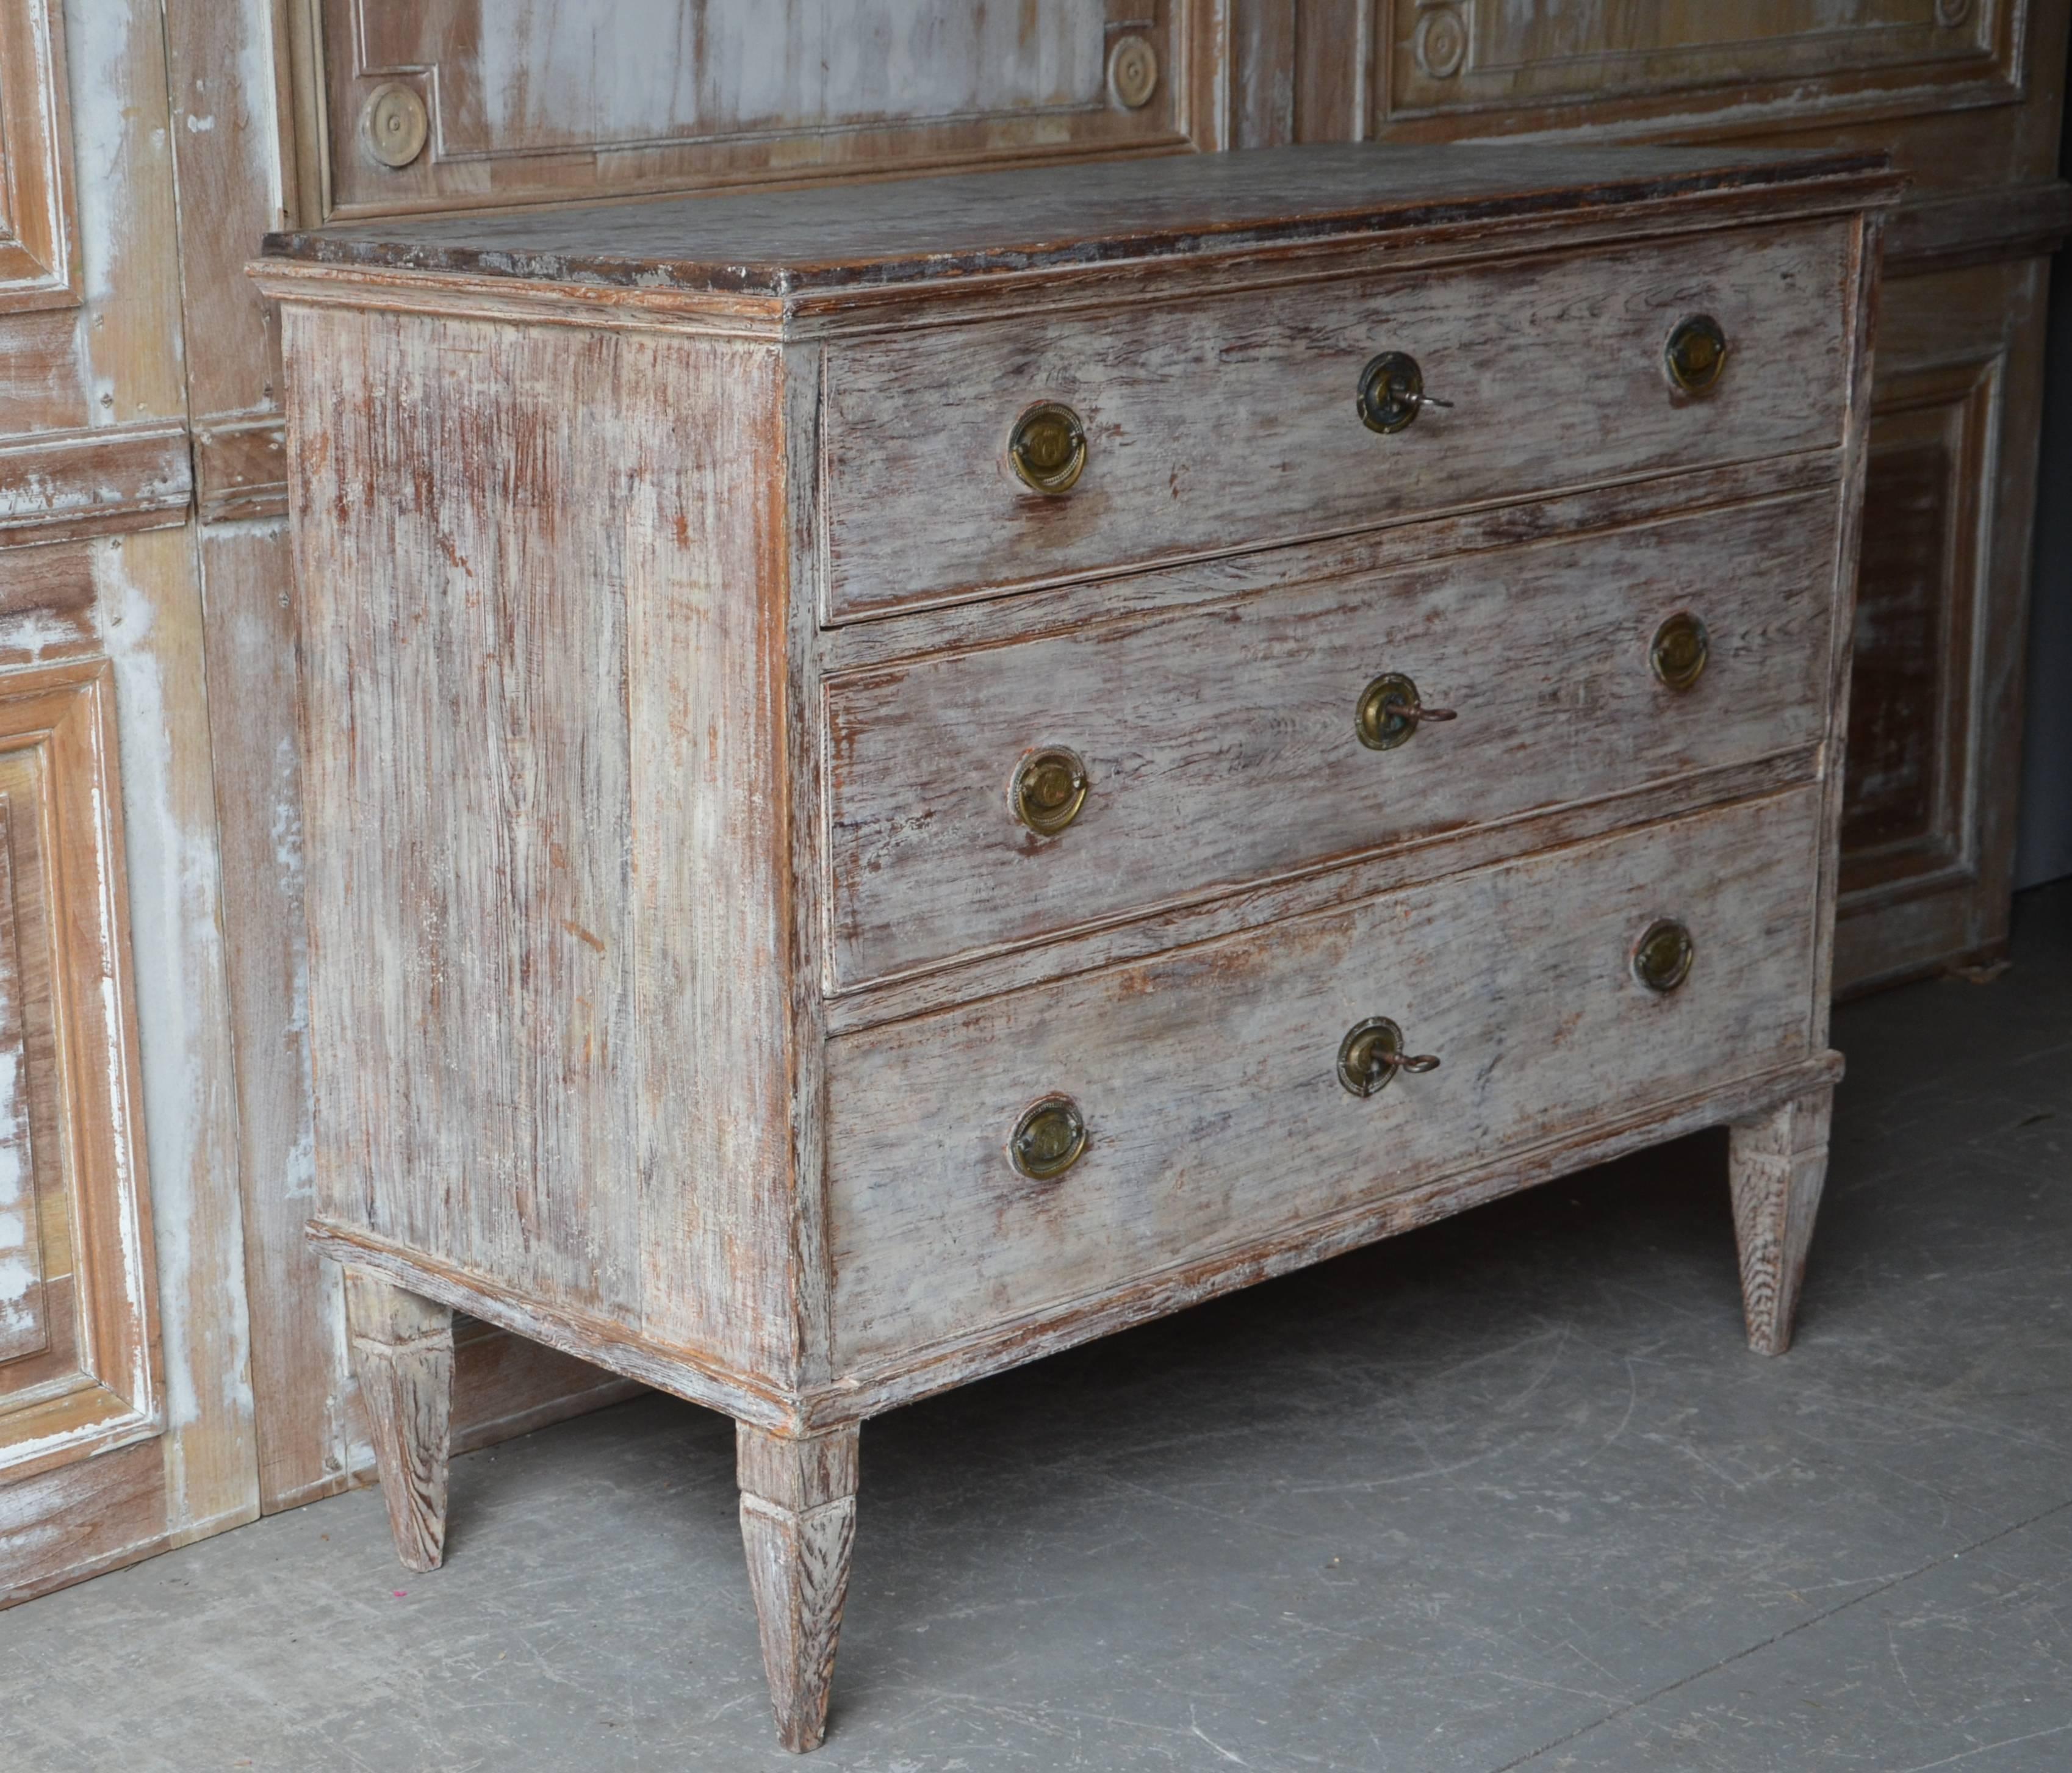 A handsome Swedish Gustavian period chest of drawers with original hardware and original wonderful worn patina.
Stockholm, Sweden, 1800-1810.

Here are few examples, surprising pieces and objects, authentic, decorative and rare items that you